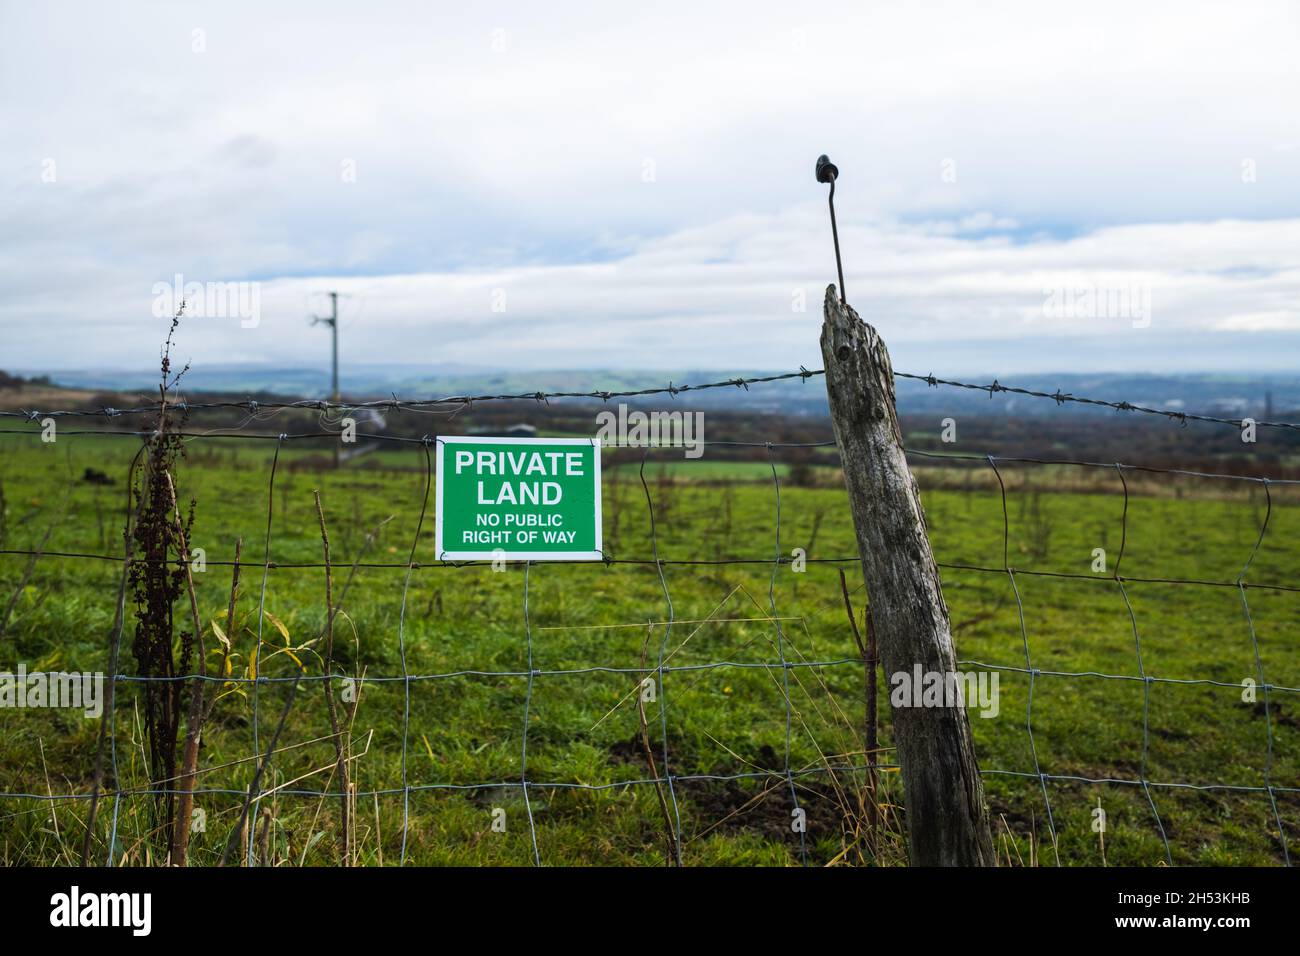 private land sign on old barbed wire fence Stock Photo